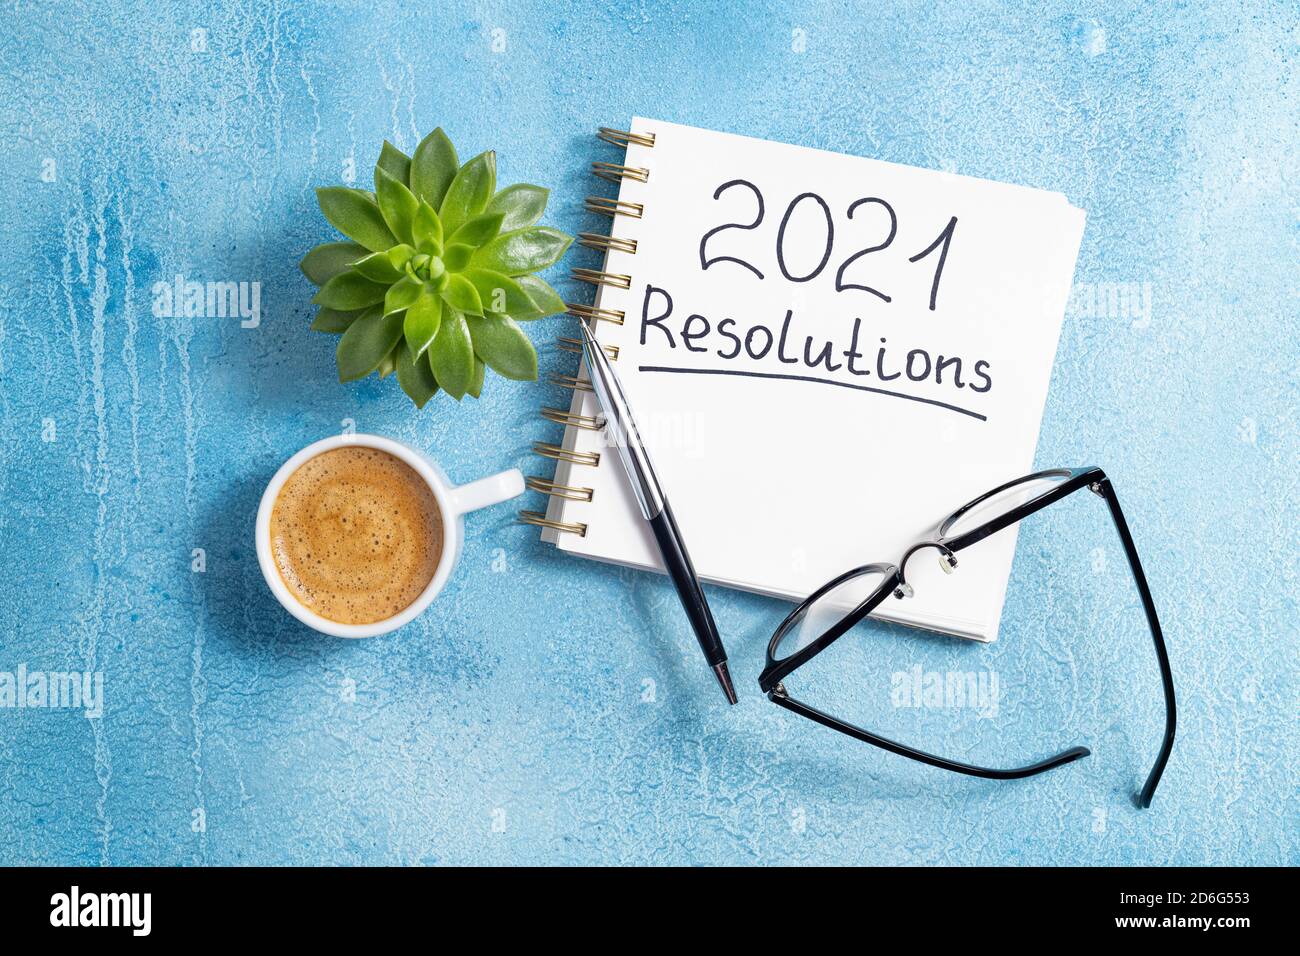 New year resolutions 2021 on desk. 2021 goals with notebook, coffee cup and eyeglasses on blue background. Goal, plan, strategy, action, idea concept. Stock Photo